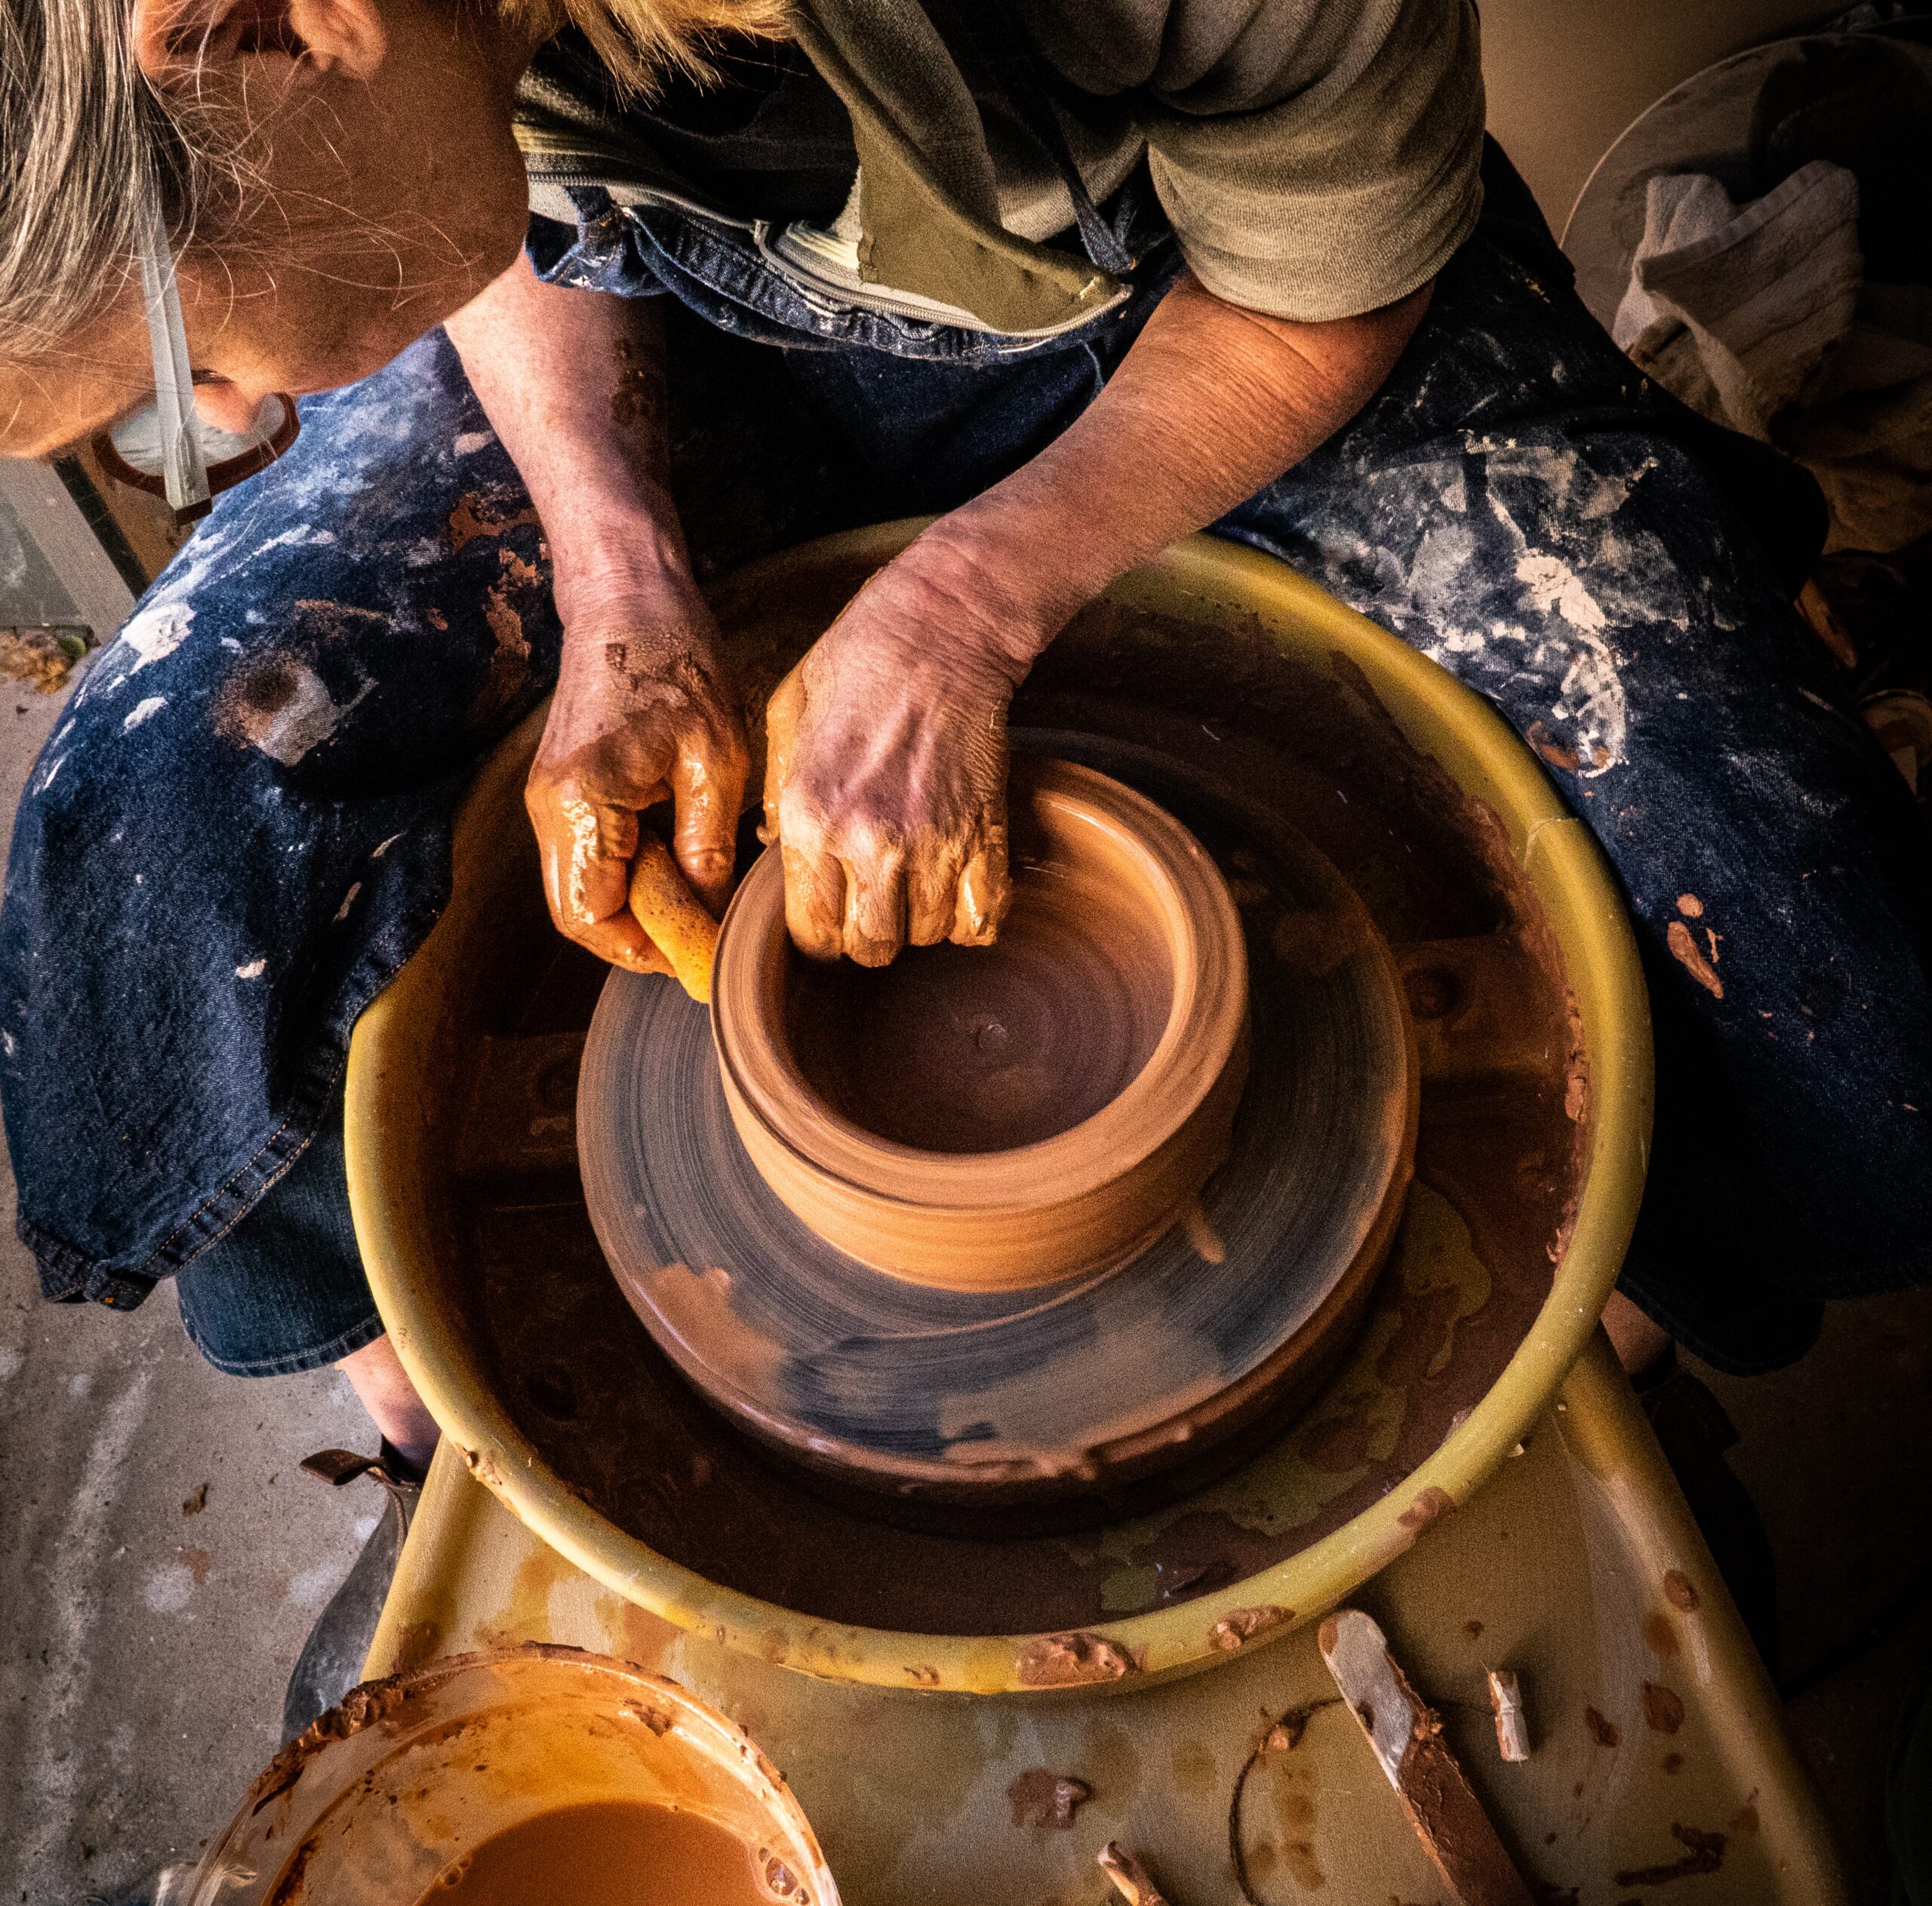 A person uses a pottery wheel to craft a bowl